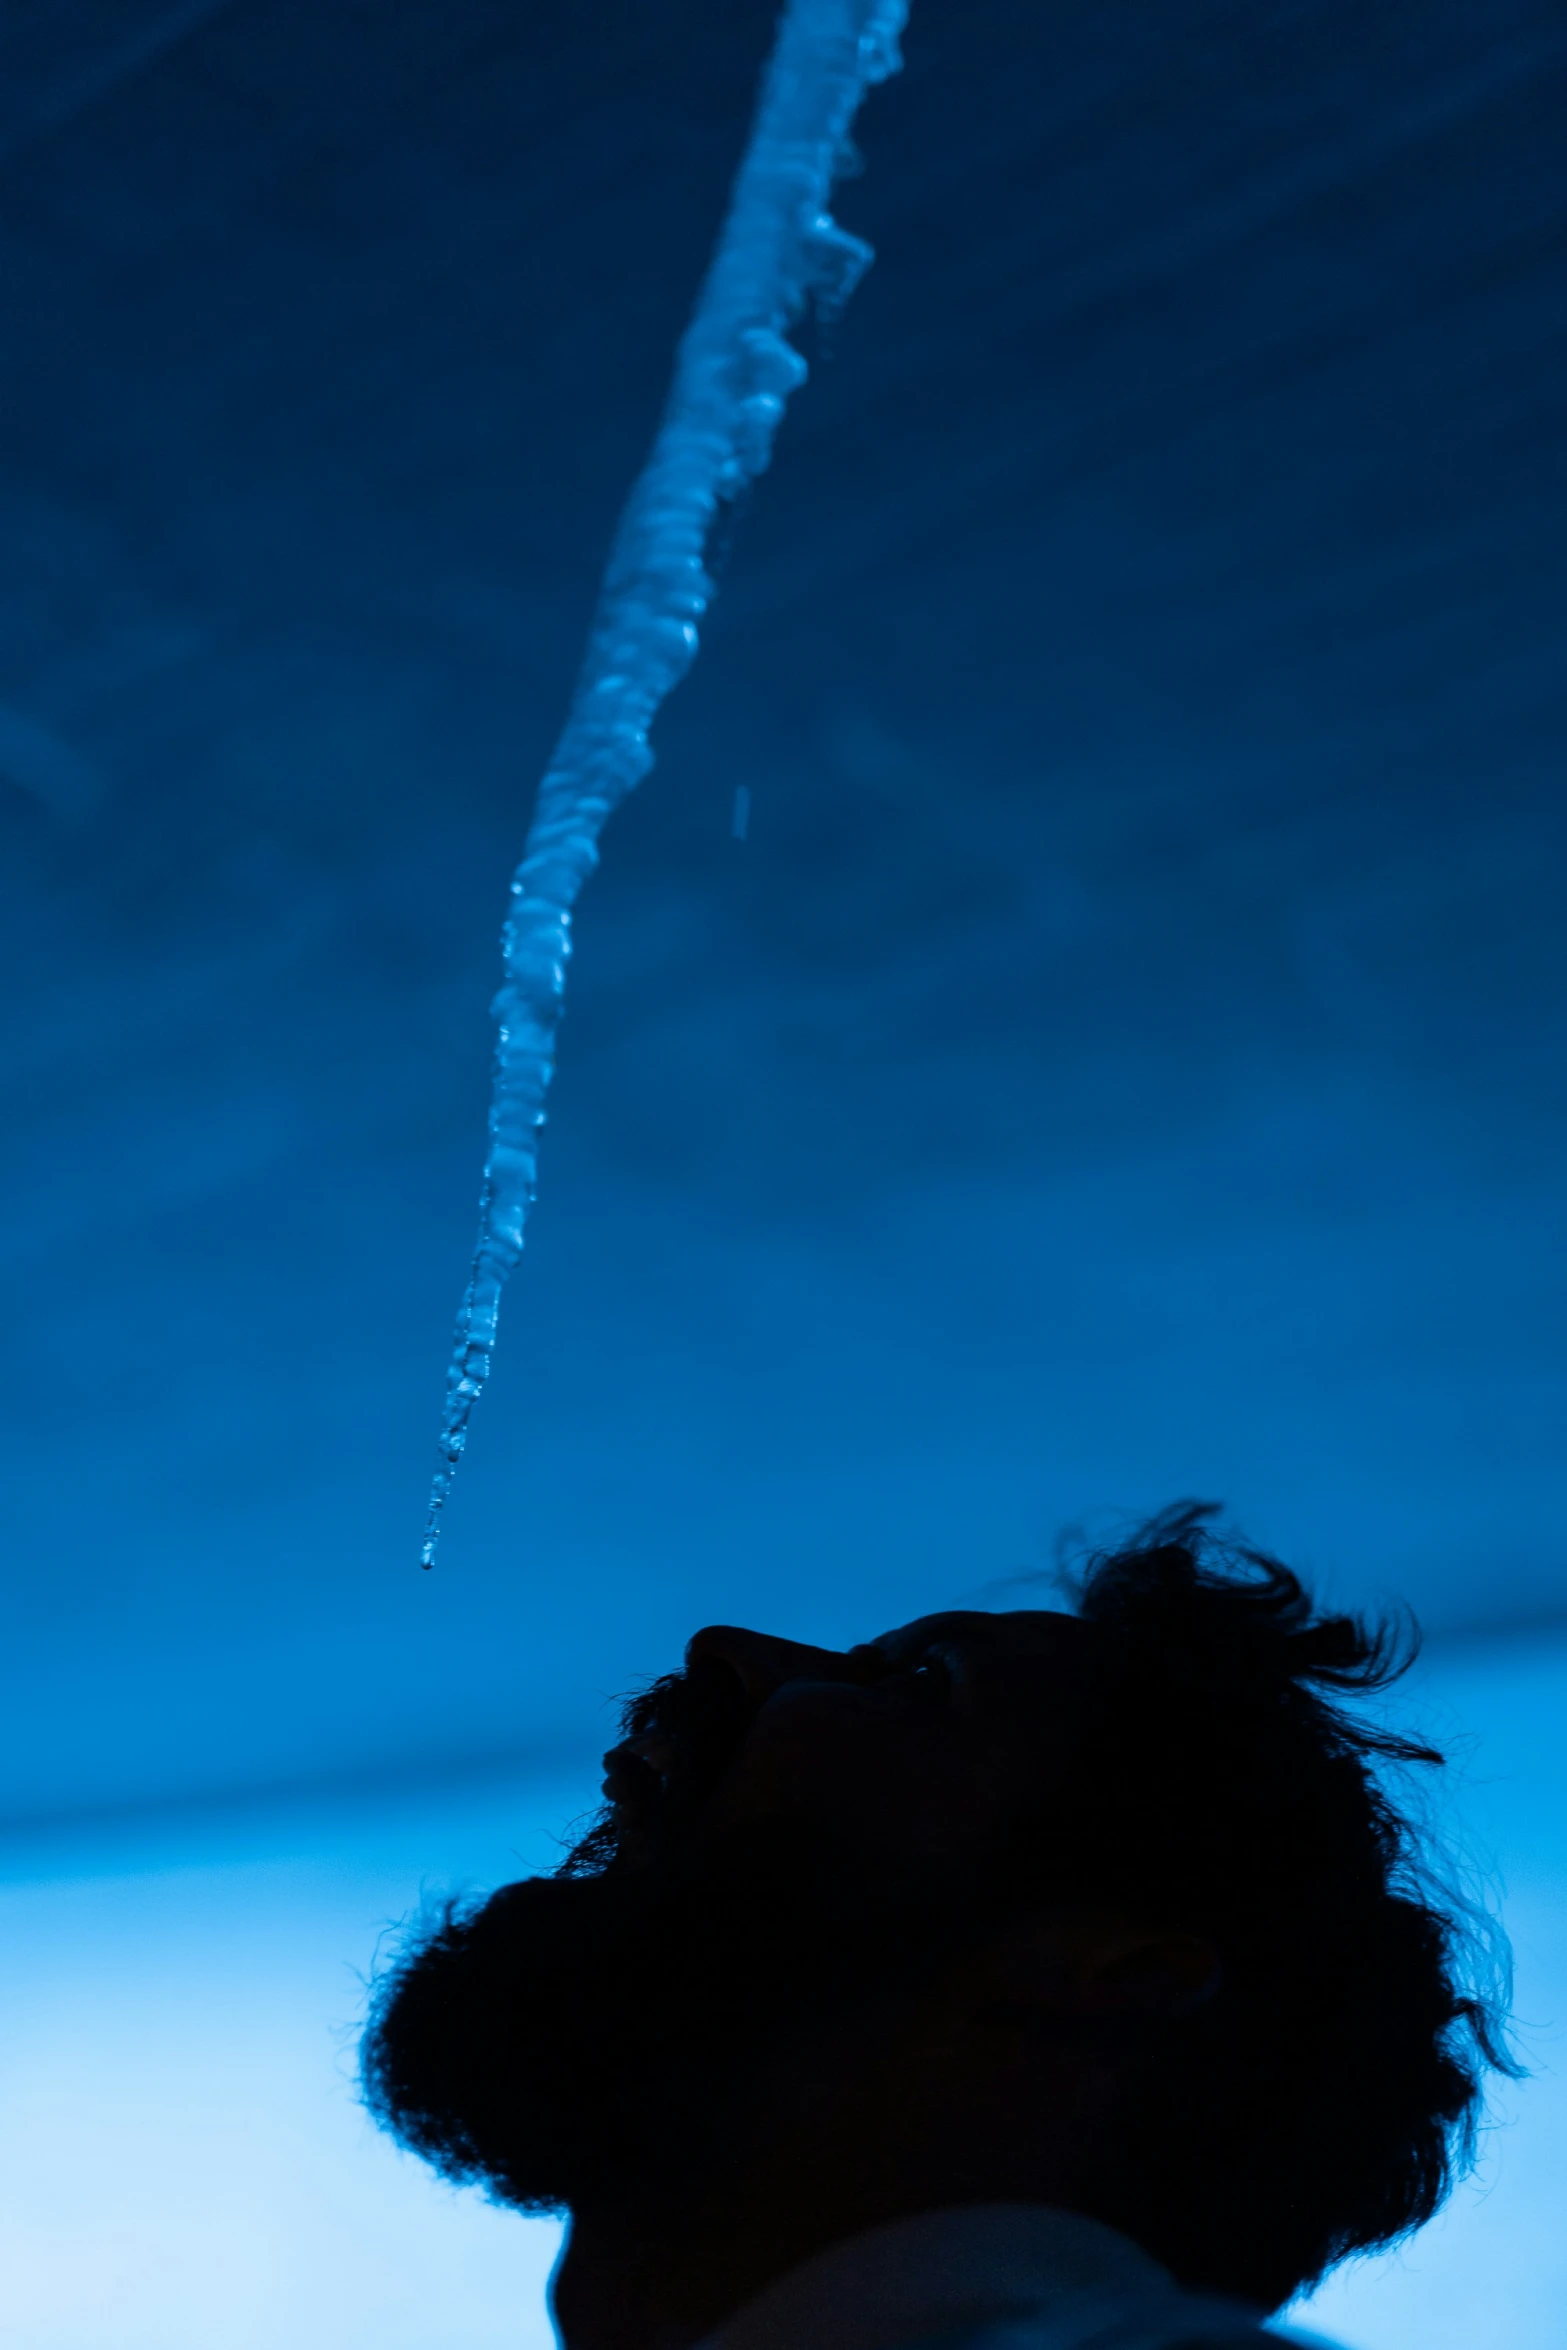 a person looks up to the sky as some ice crystals are in mid - air